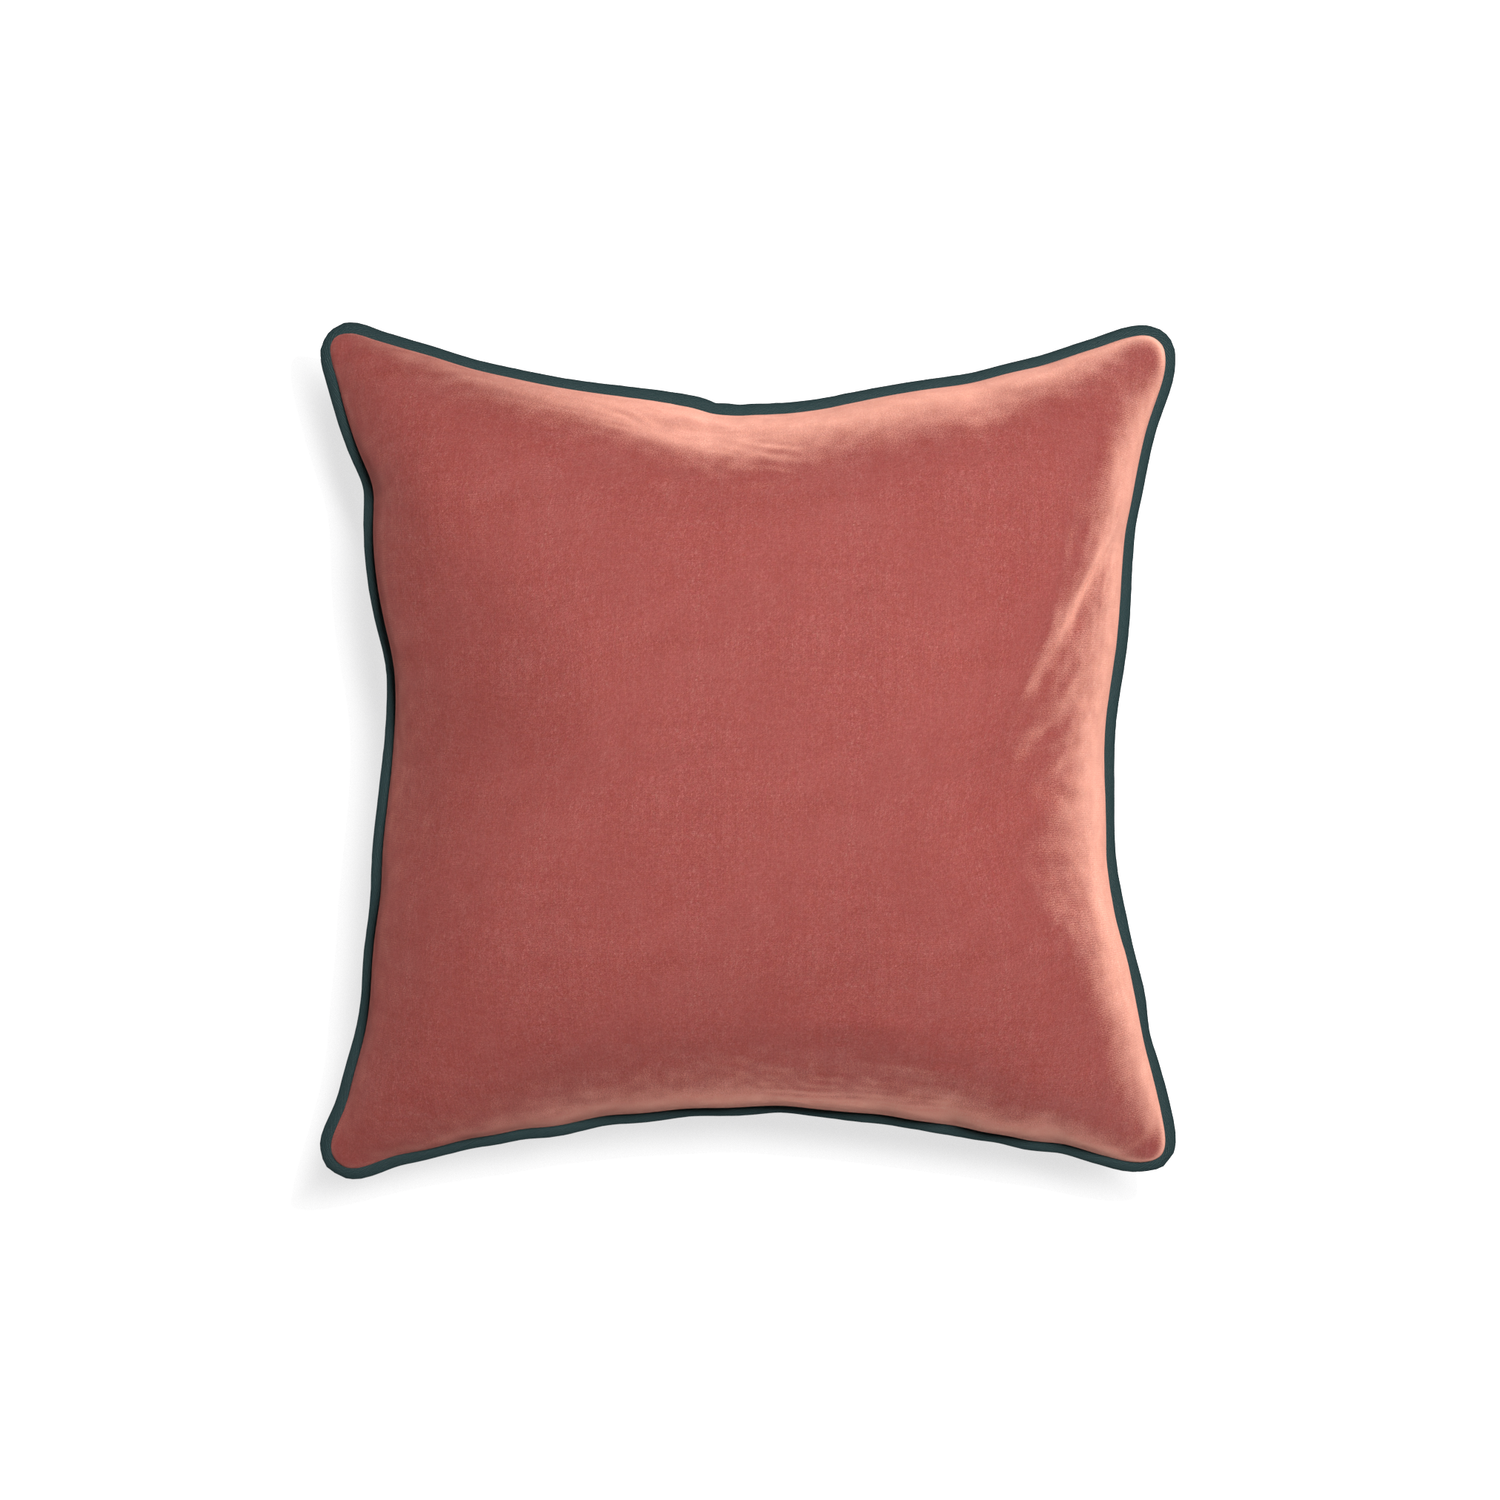 18-square cosmo velvet custom coralpillow with p piping on white background